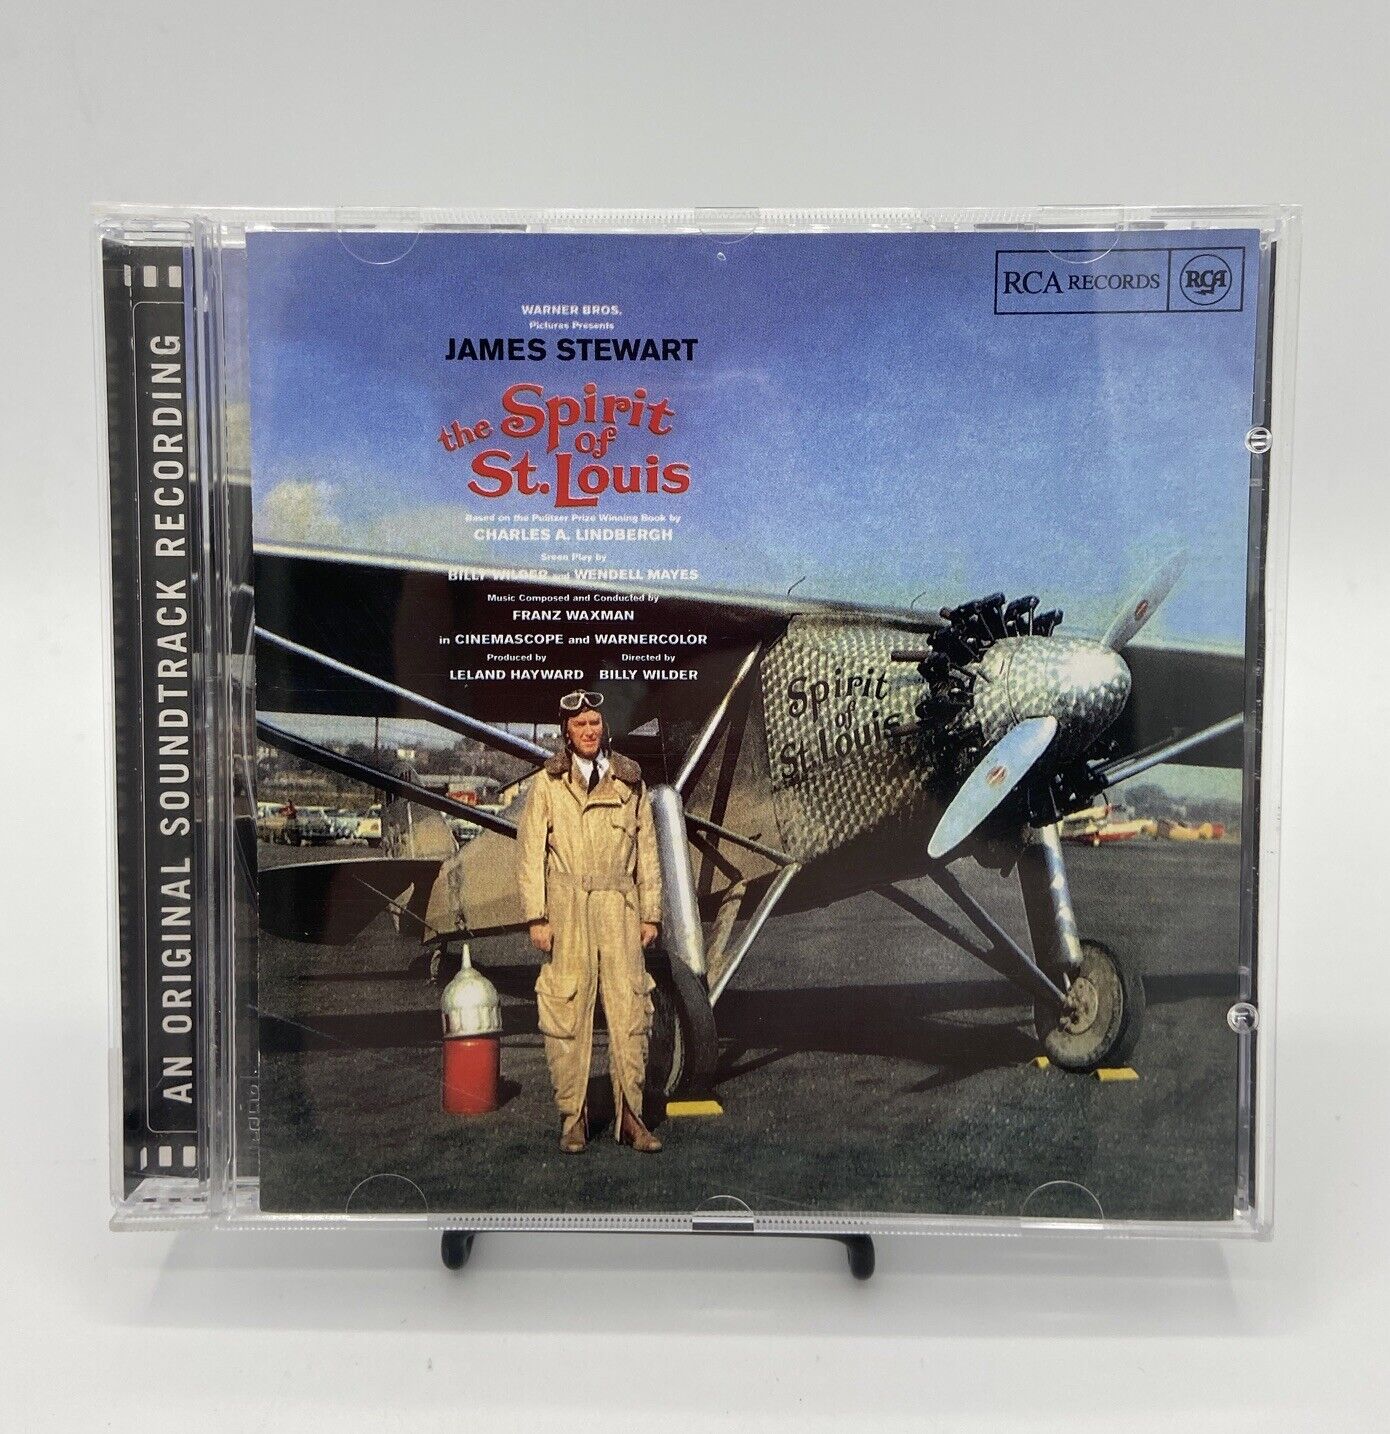 Spirit Of St. Louis by Franz Waxman (Composer) (CD, RCA, 1999) Soundtrack OOP